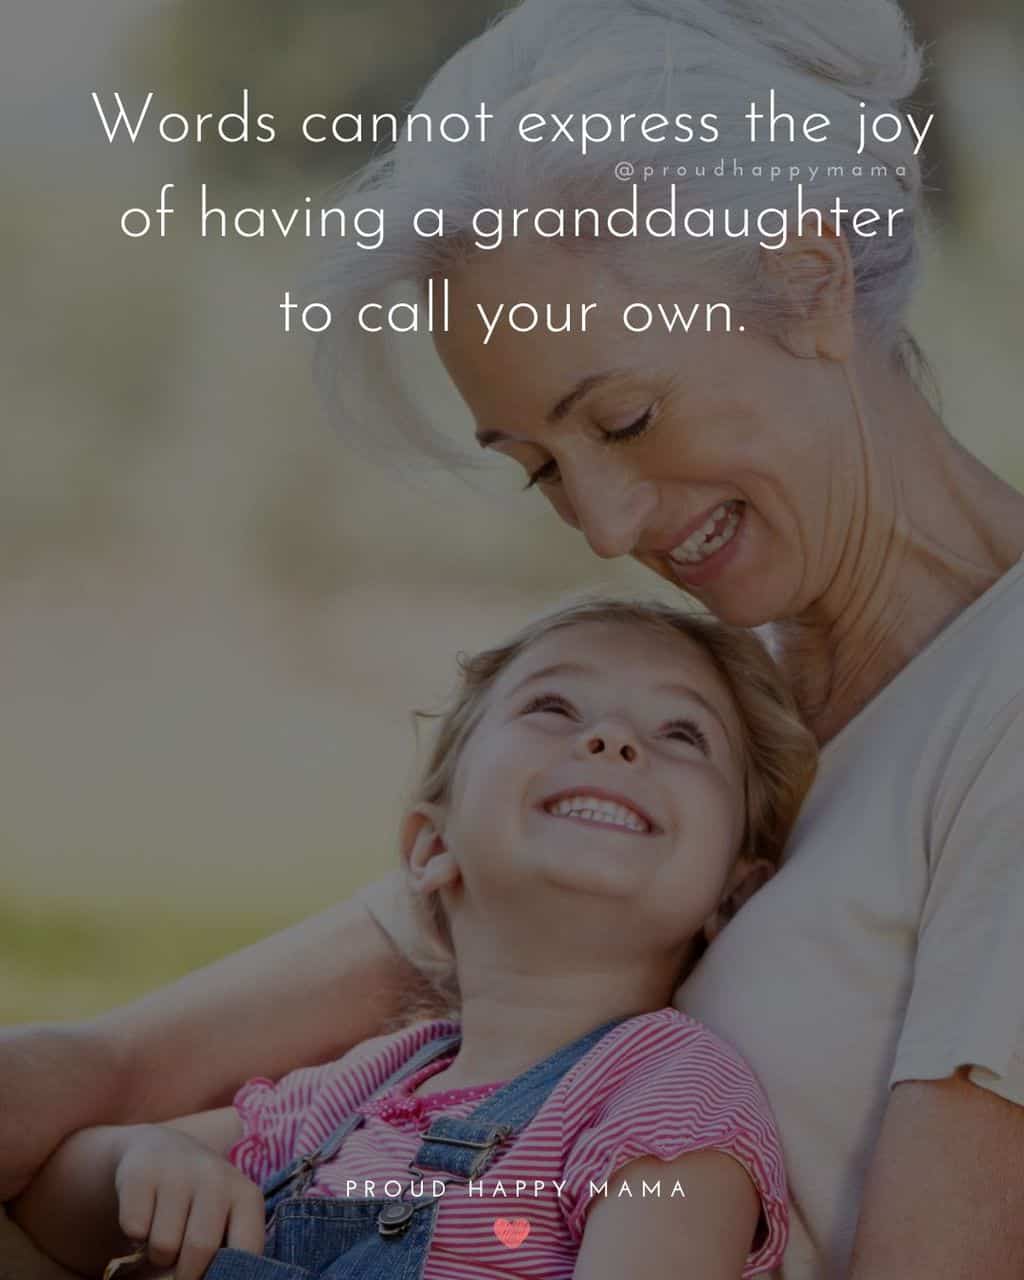 Granddaughter Quotes - Words cannot express the joy of having a granddaughter to call your own.